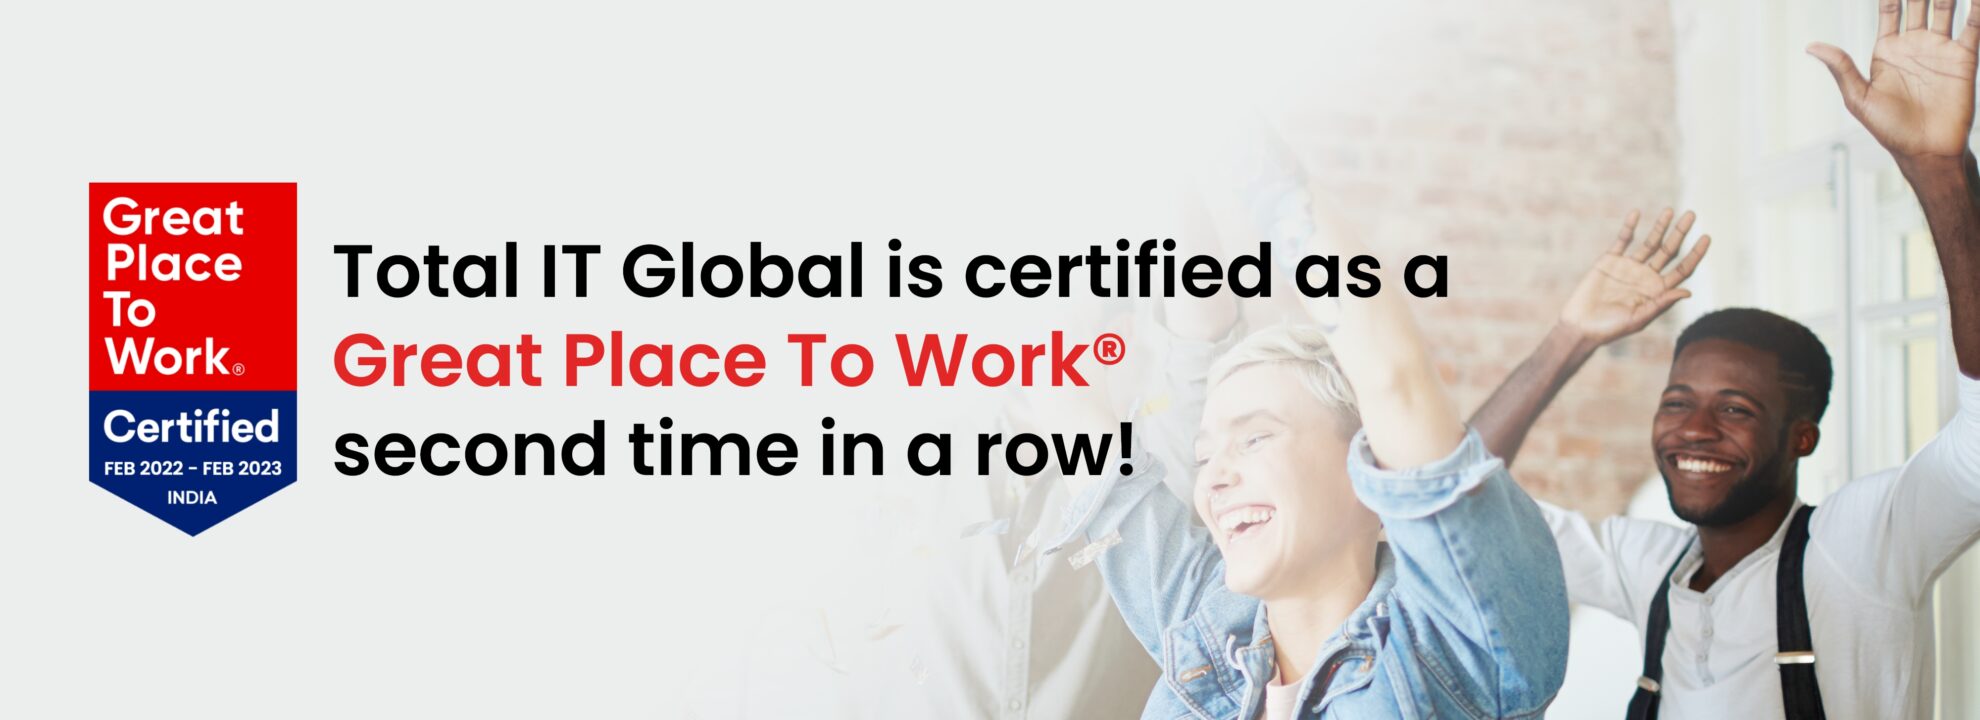 total it global great place to work certified